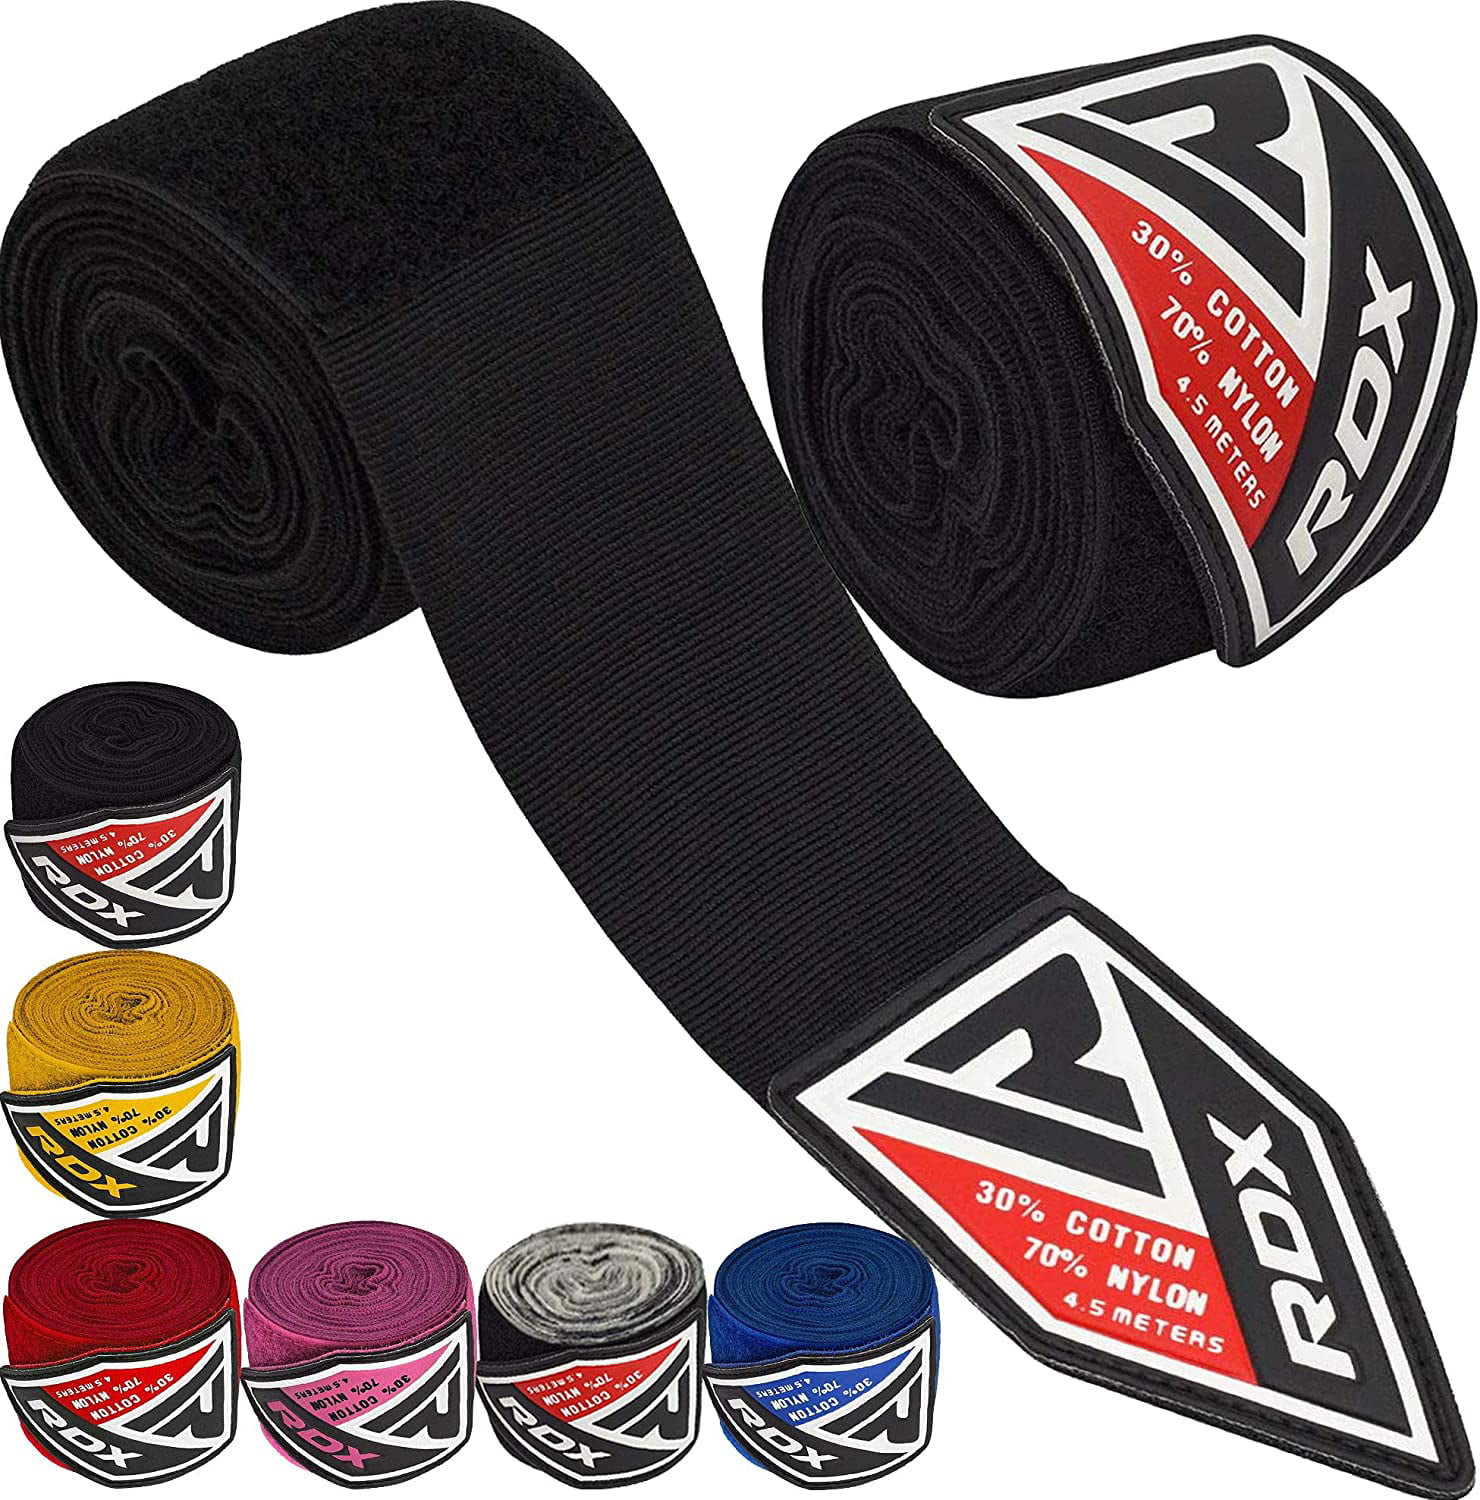 DAM 5 Pair of Hand Wraps Boxing MMA UFC HAND WRAPS Wrist Guards Pink 